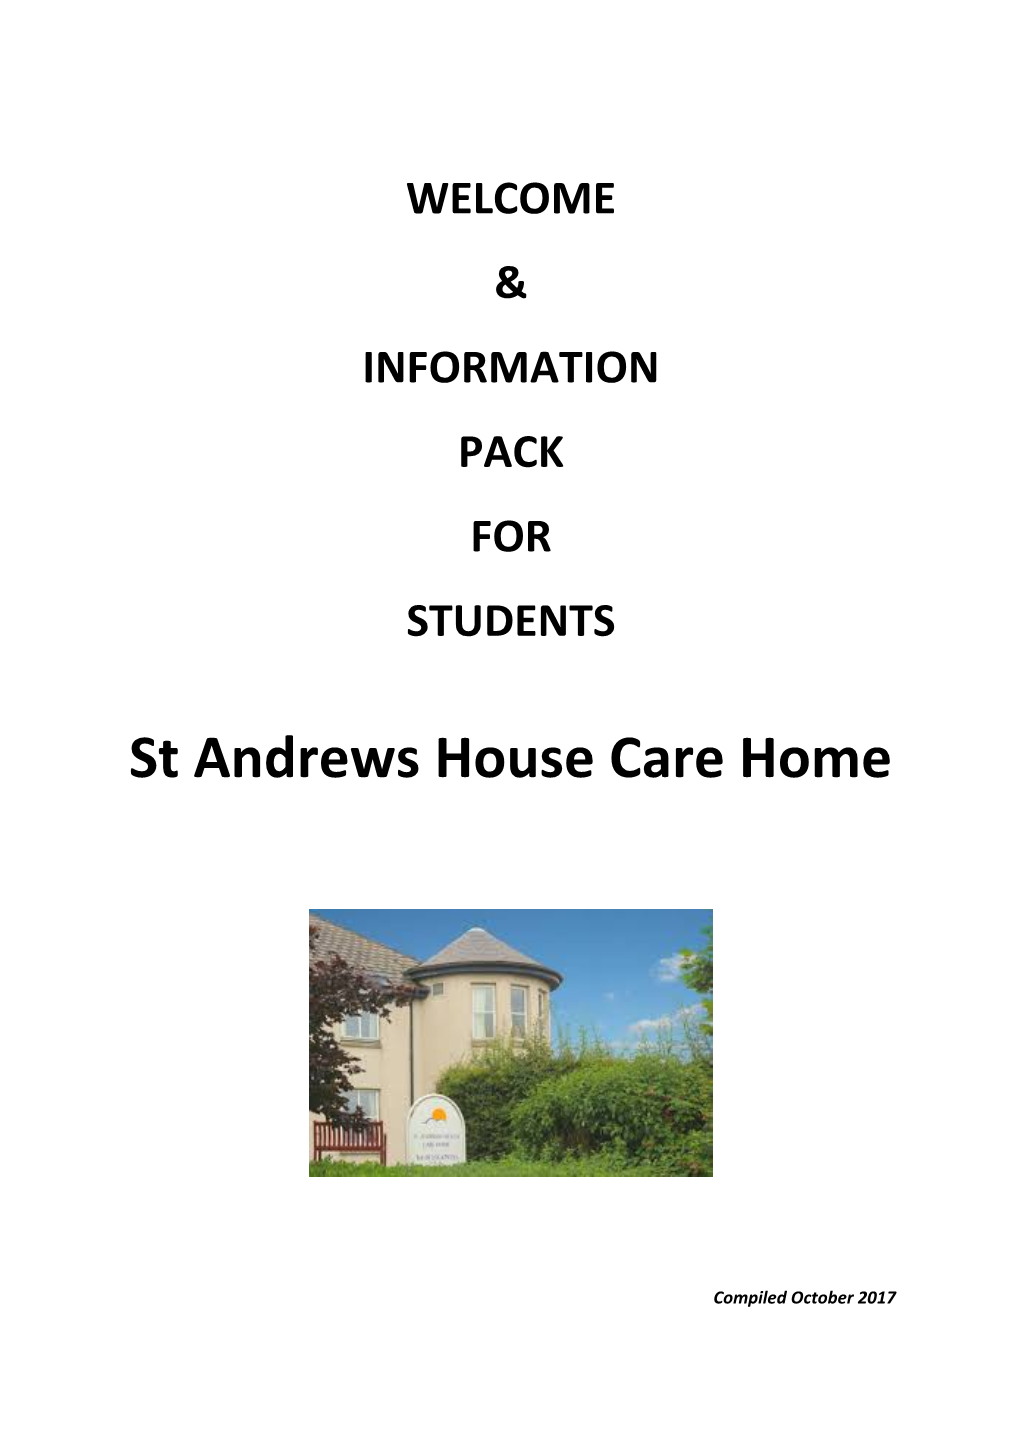 St Andrews House Care Home